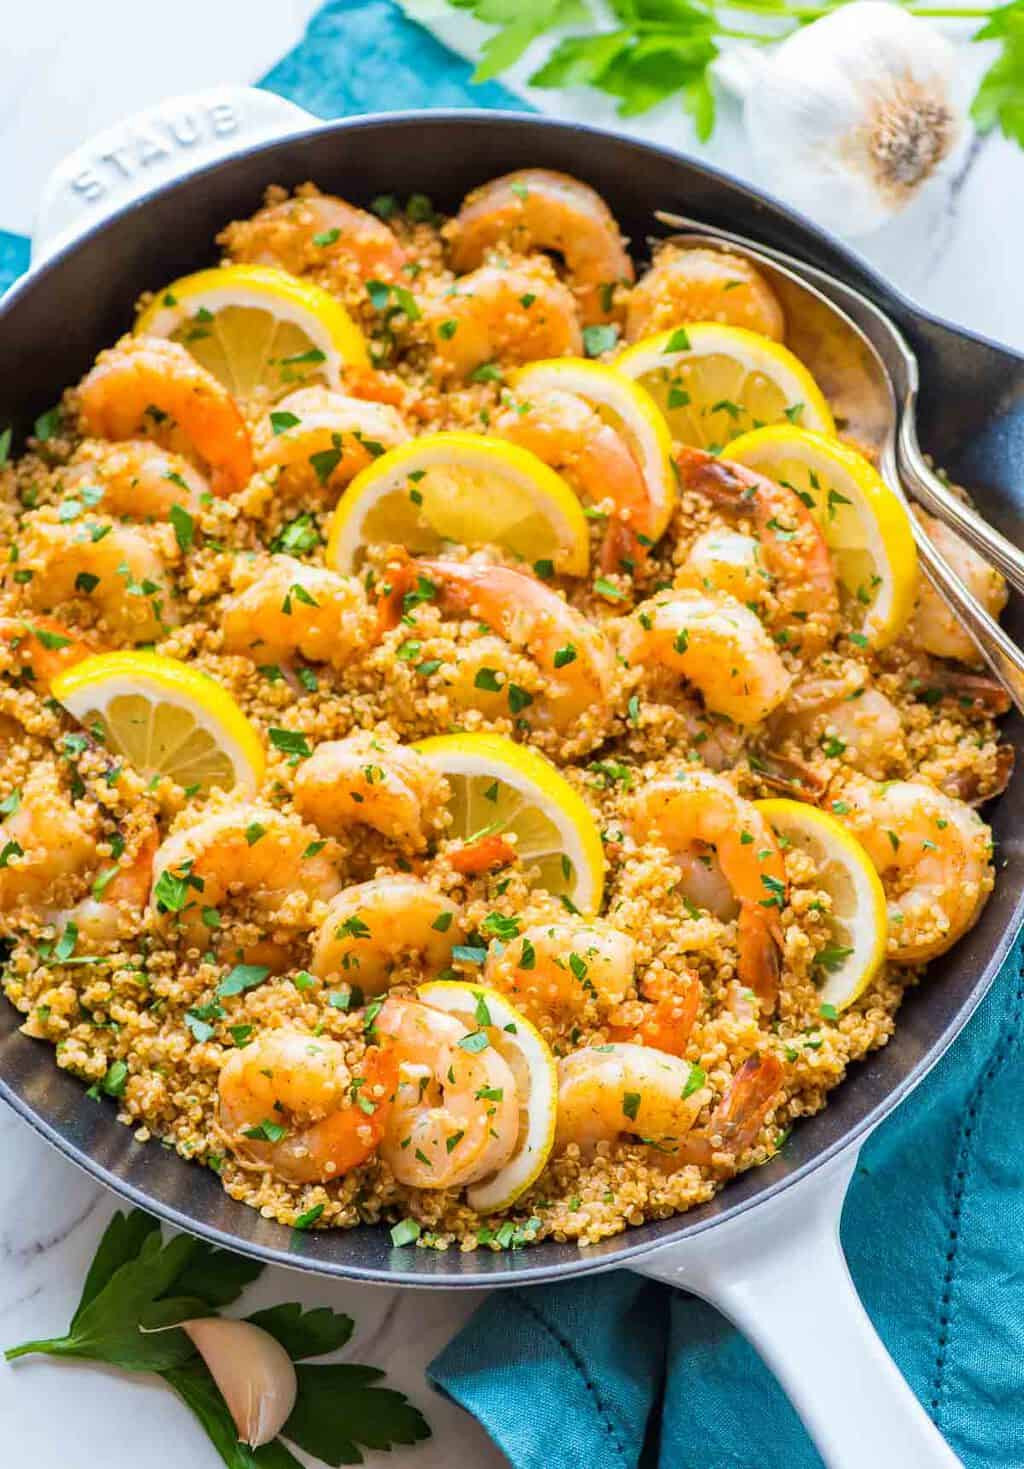 Quinoa Dinner Ideas
 8 Cozy e Pot Dinners For Fall That Are Actually Healthy